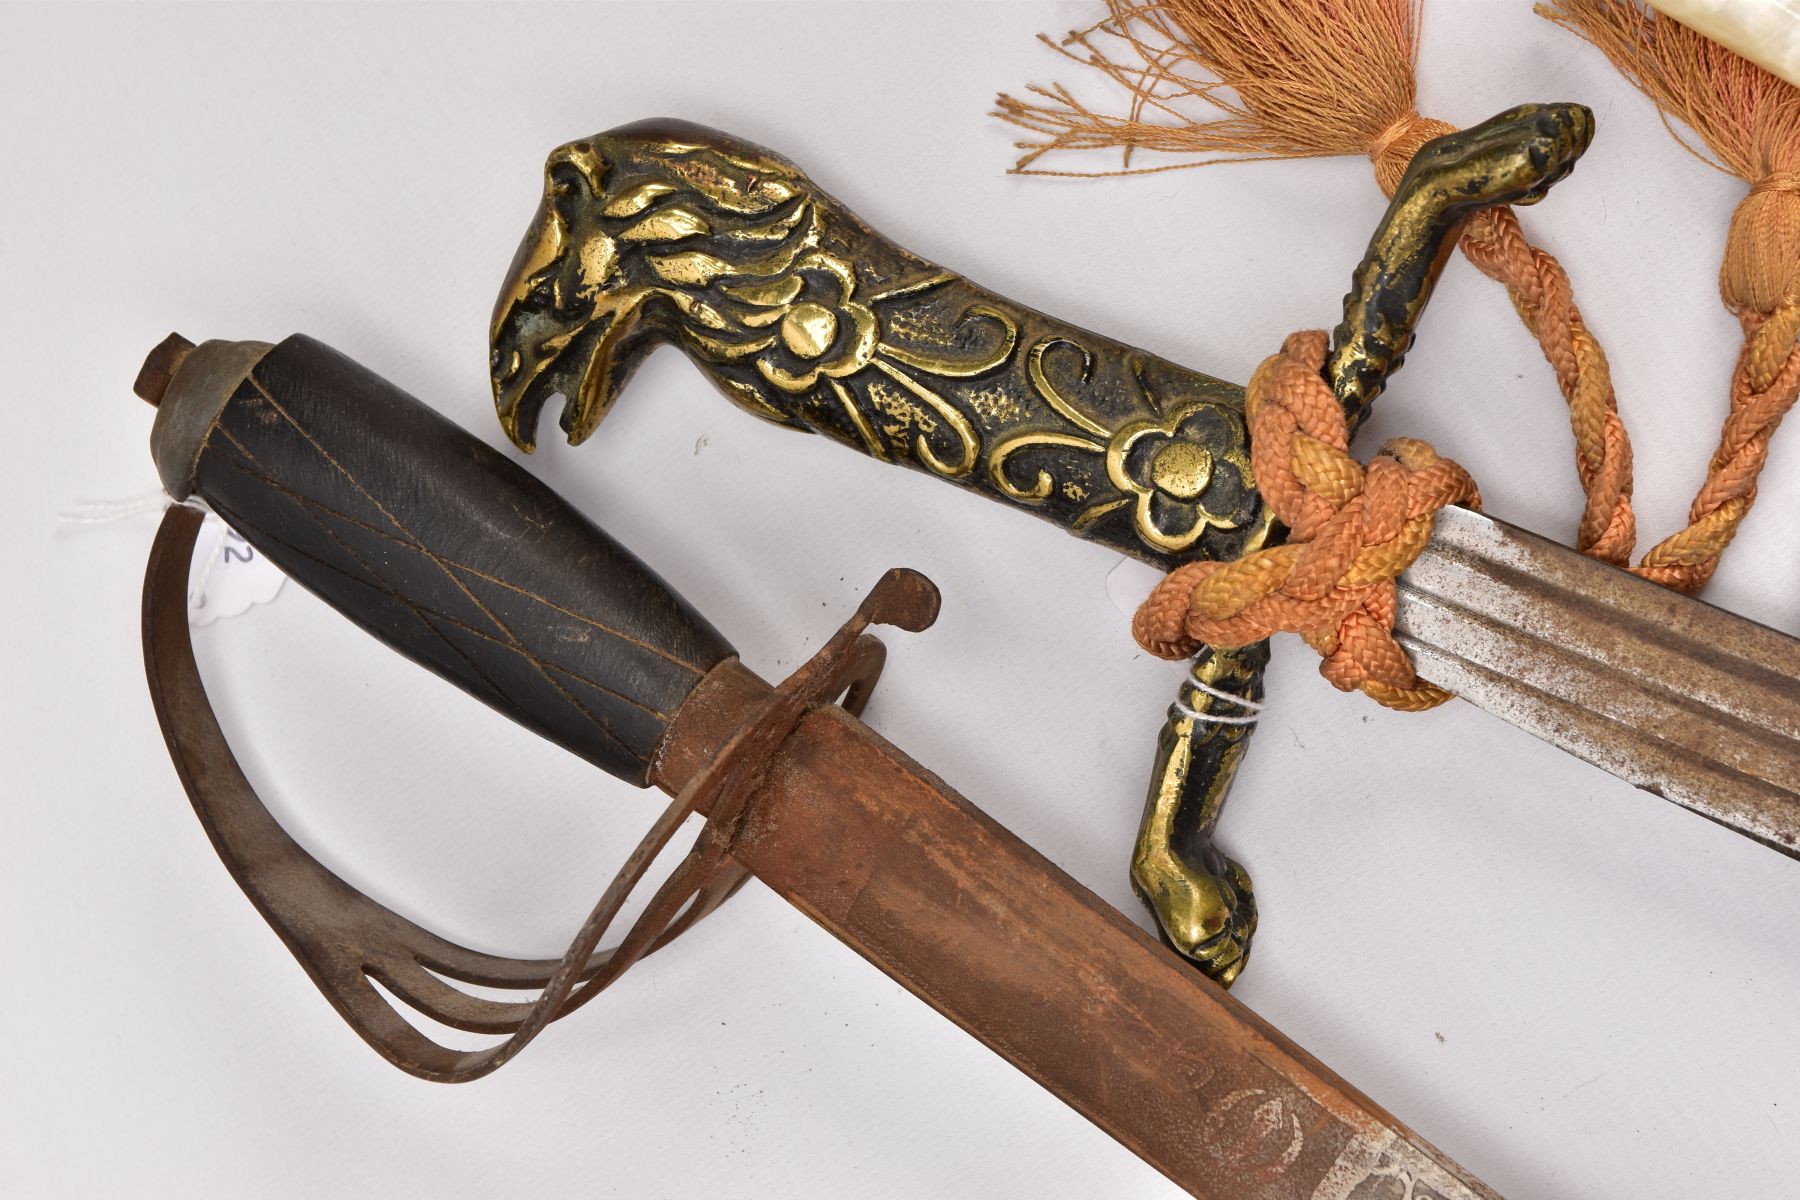 FIVE ASSORTED BLADED WEAPONS, two small short swords, curved blades, poorly constructed, knots in - Image 11 of 14